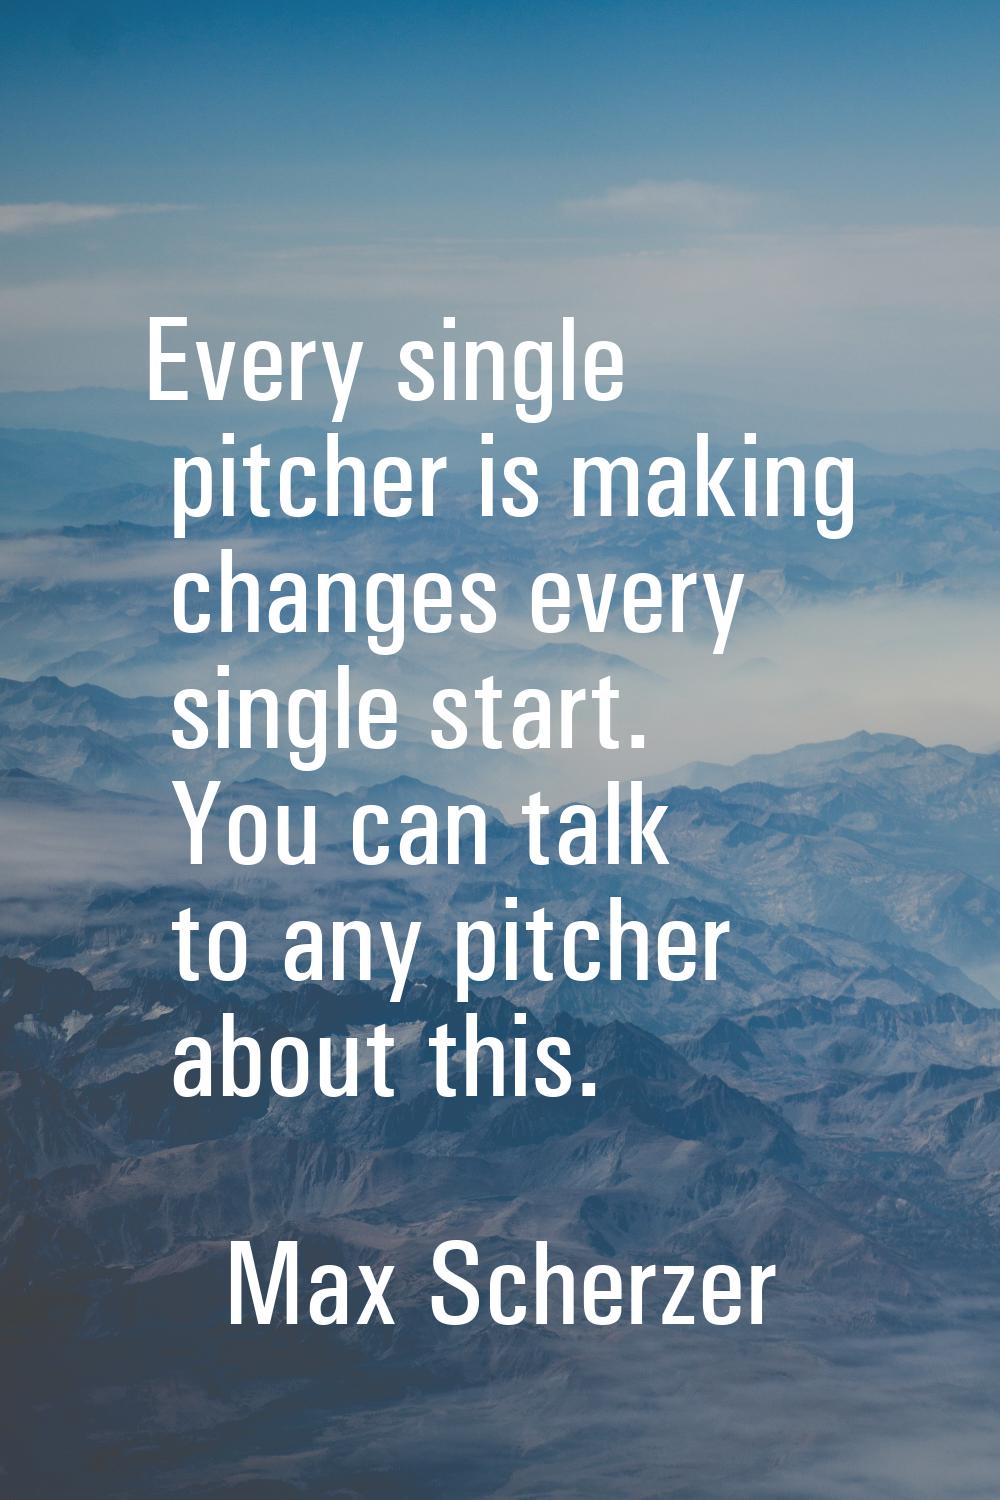 Every single pitcher is making changes every single start. You can talk to any pitcher about this.